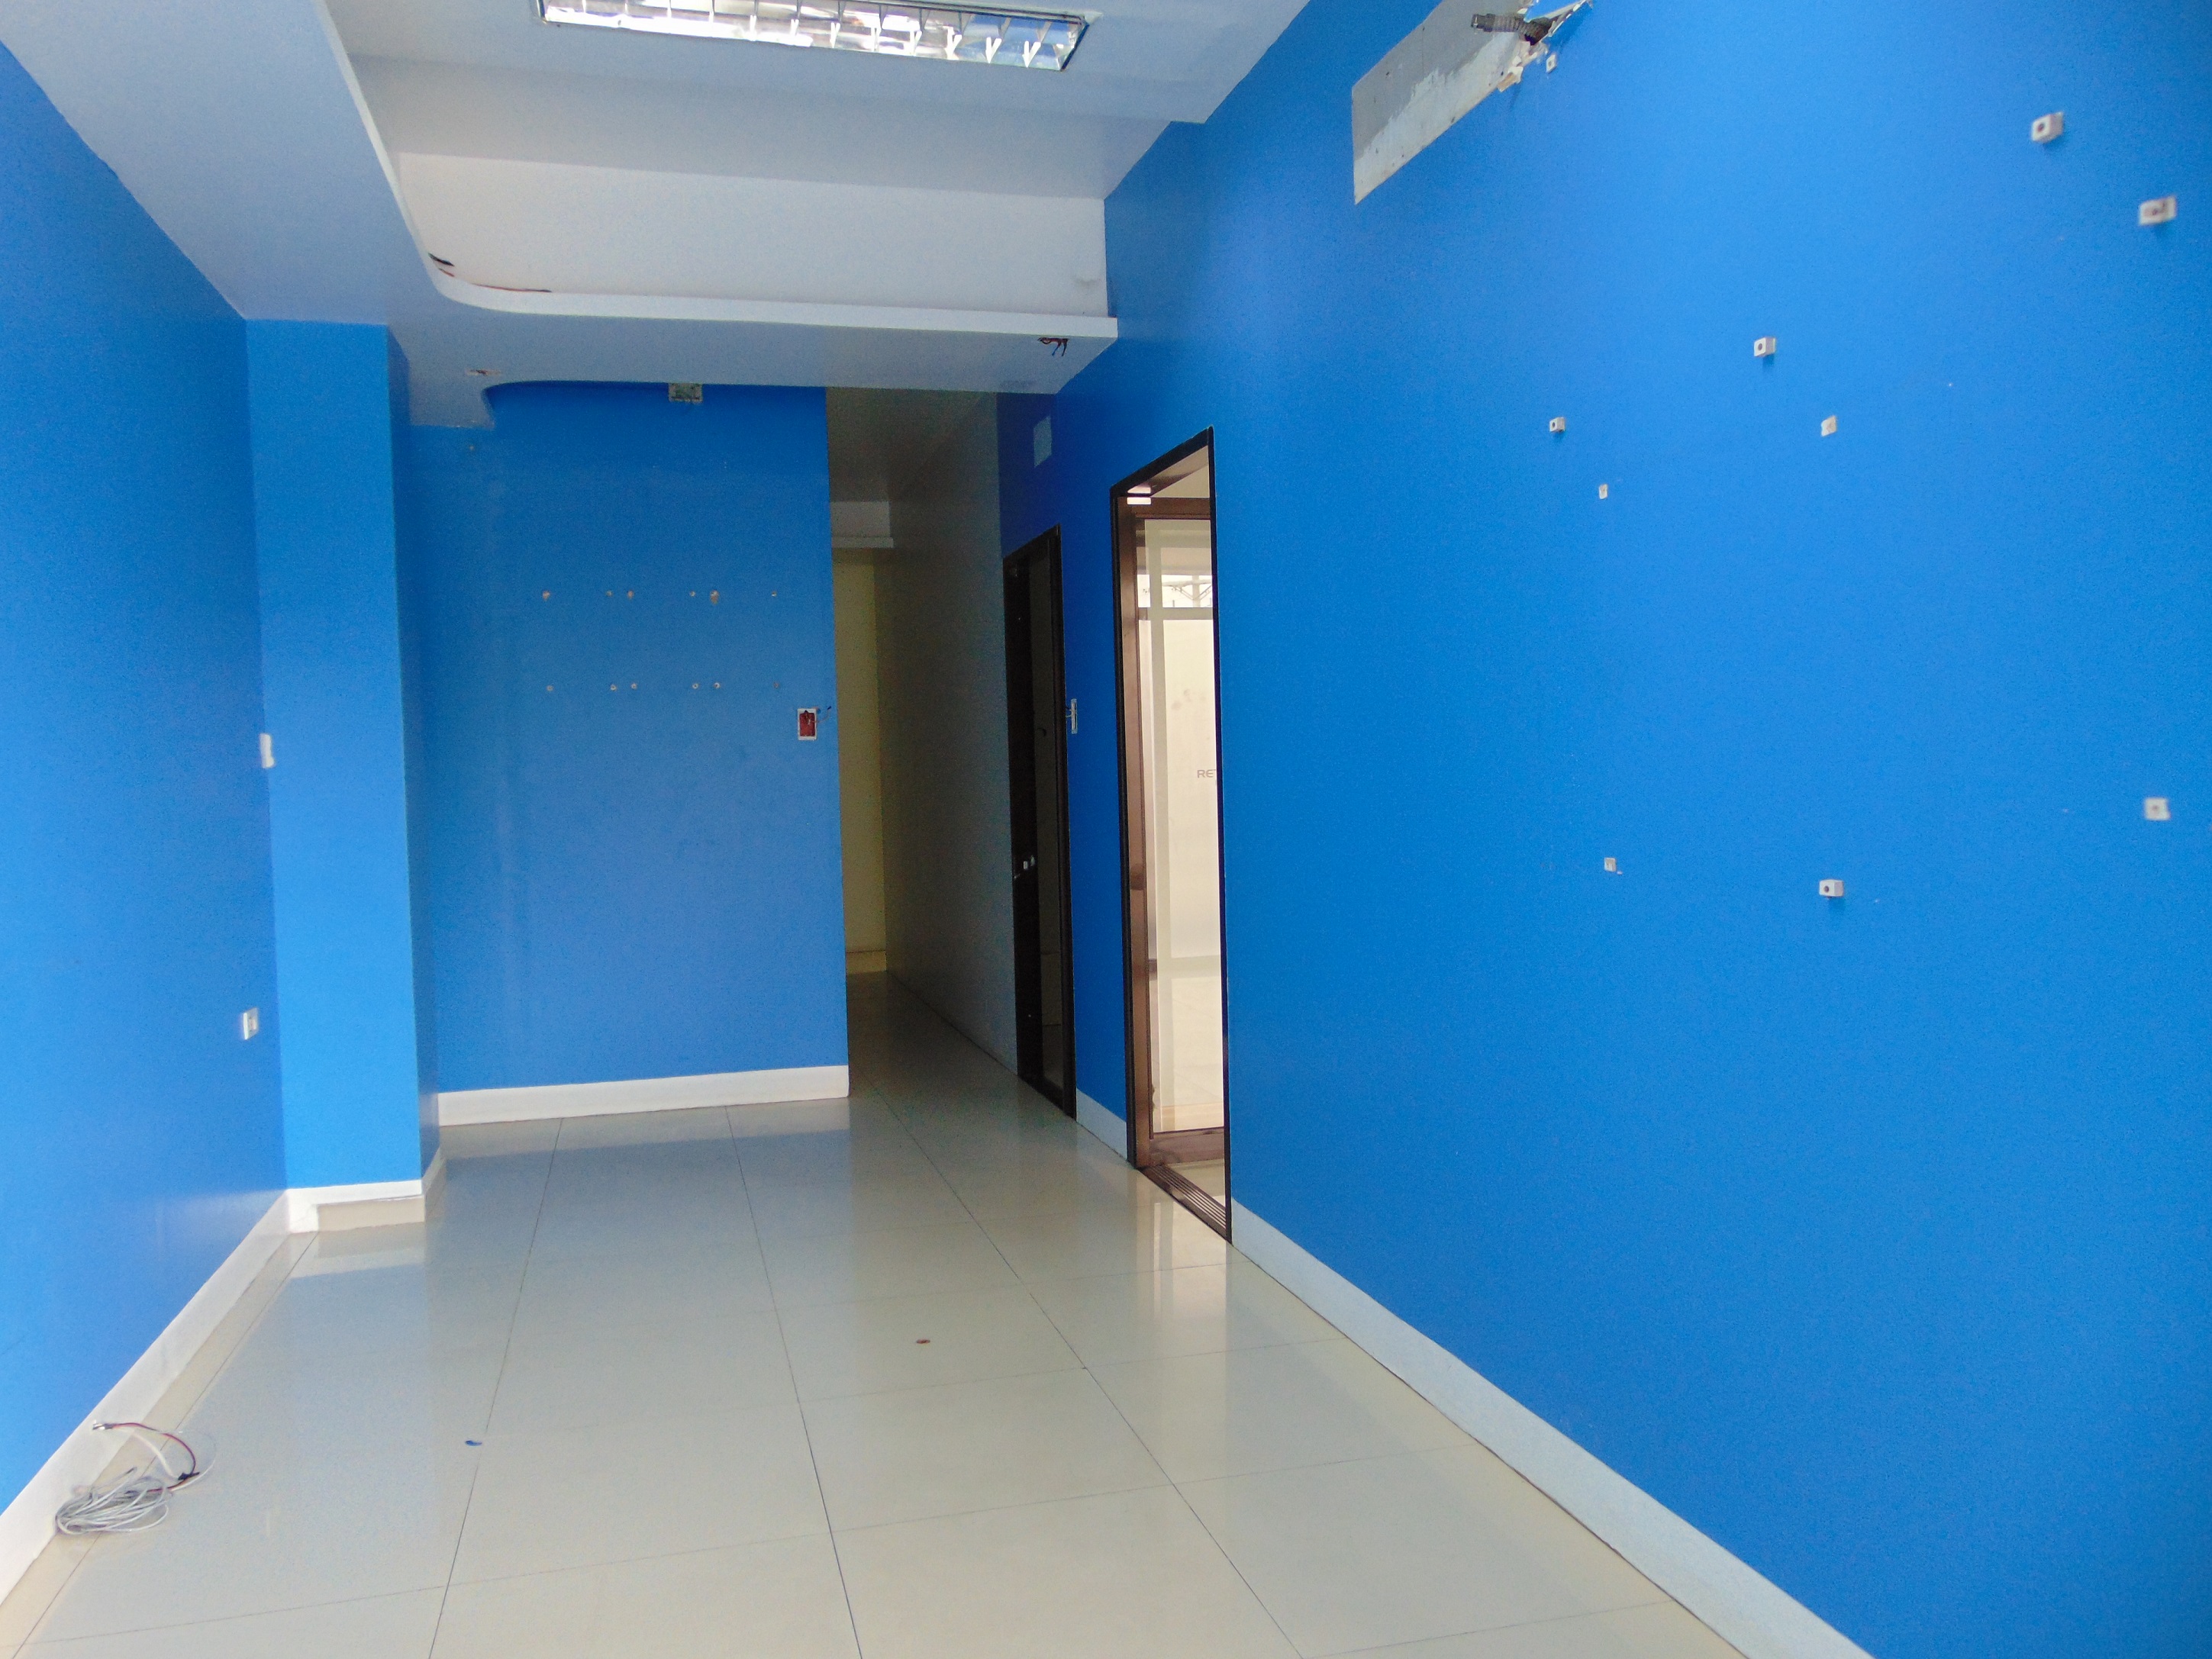 290 Sqm Office with partitions in Mandaue City - Ideal for BPOs